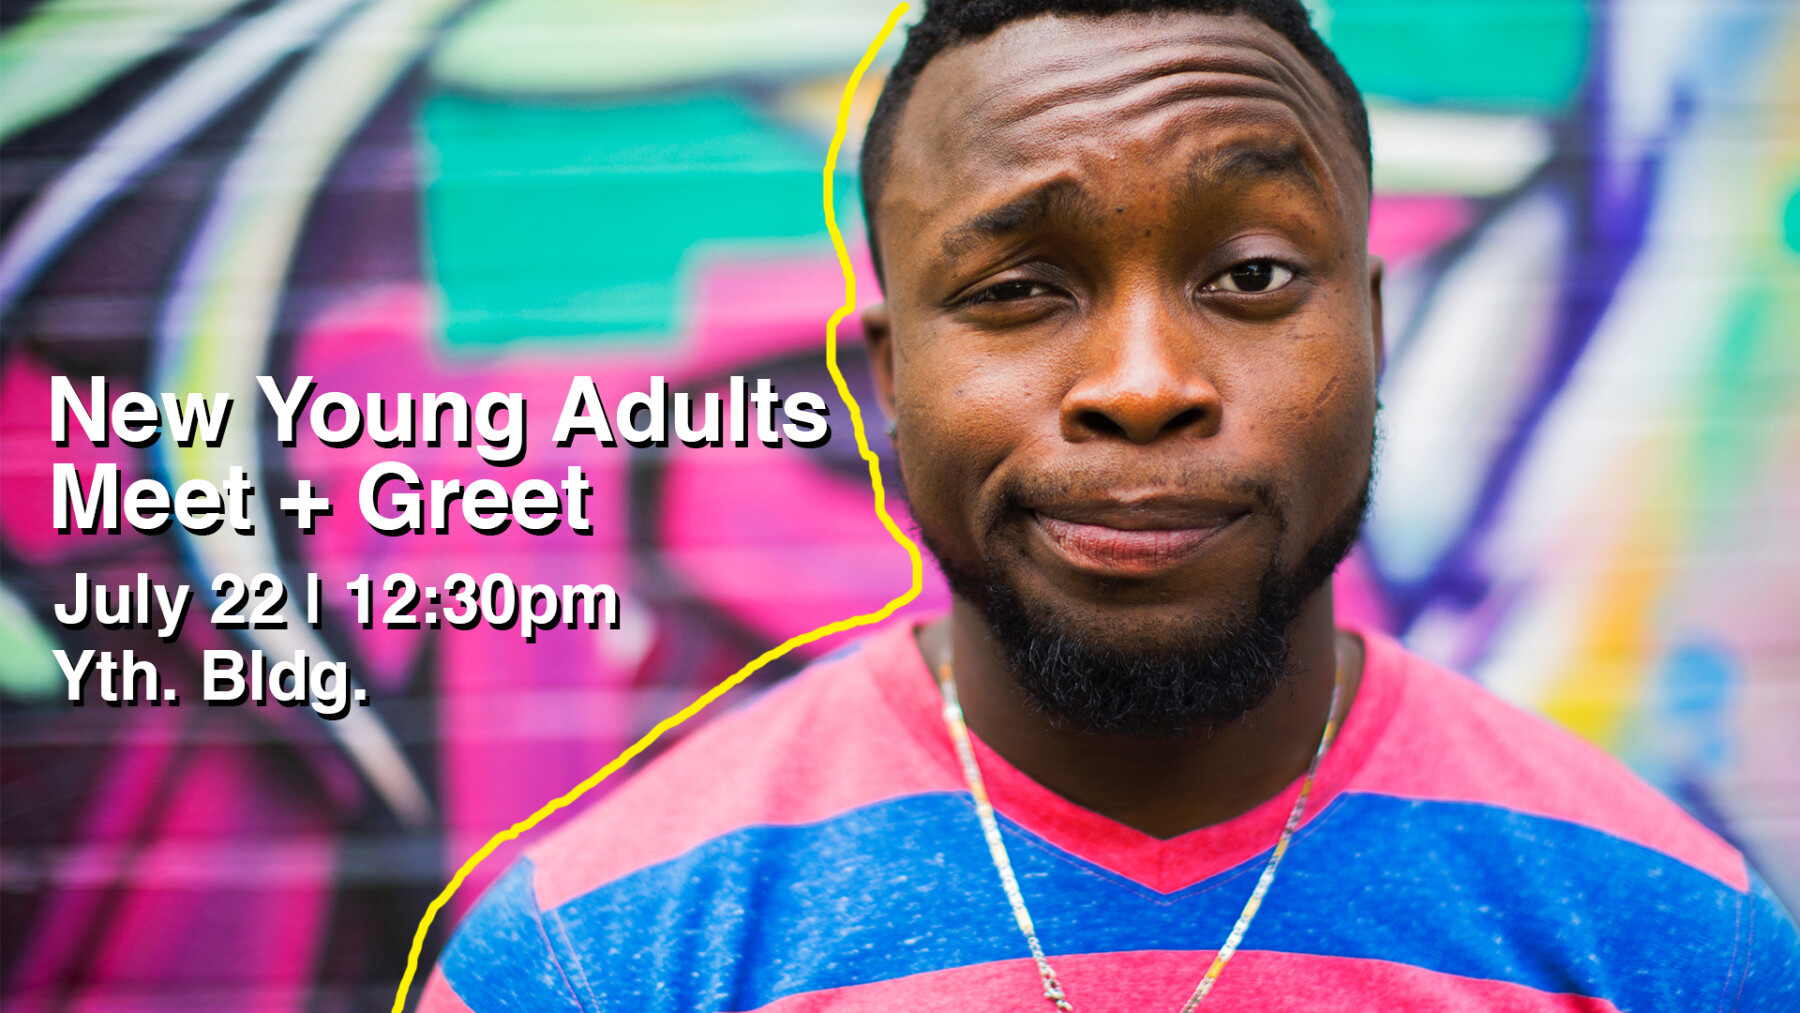 New Young Adults Meet + Greet